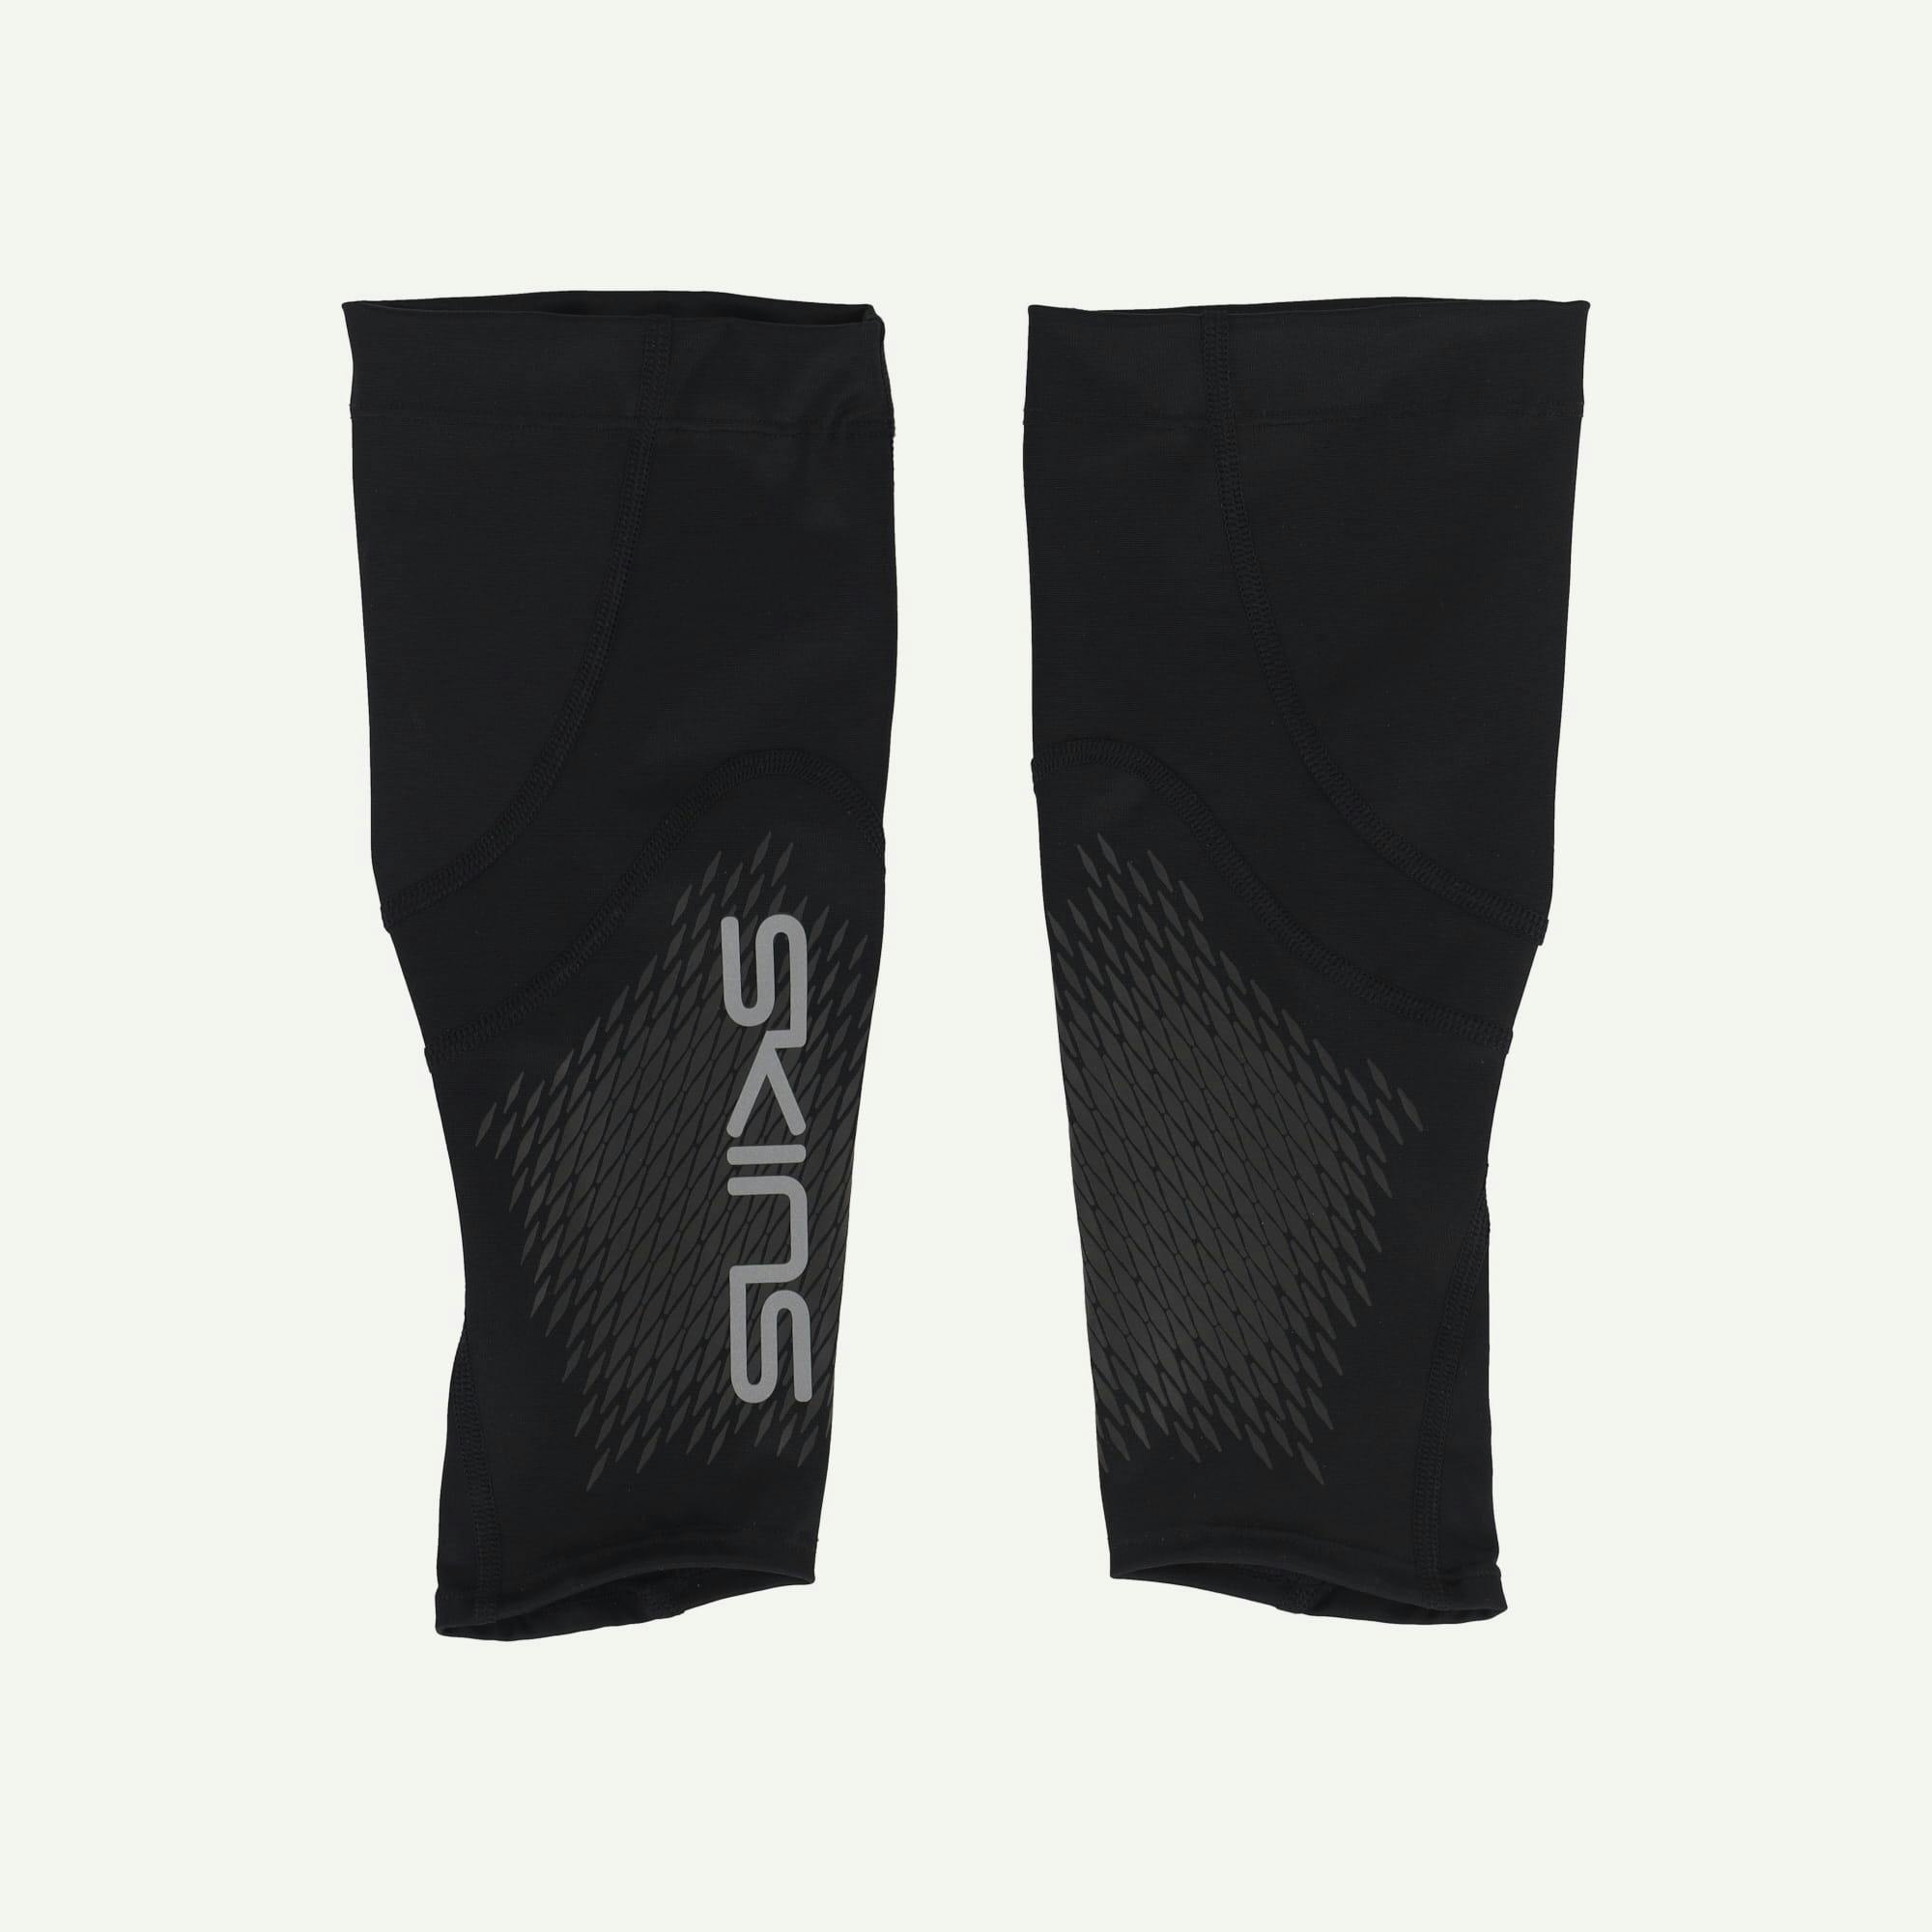 SKINS Compression As new Black Series 3 Calf Sleeves